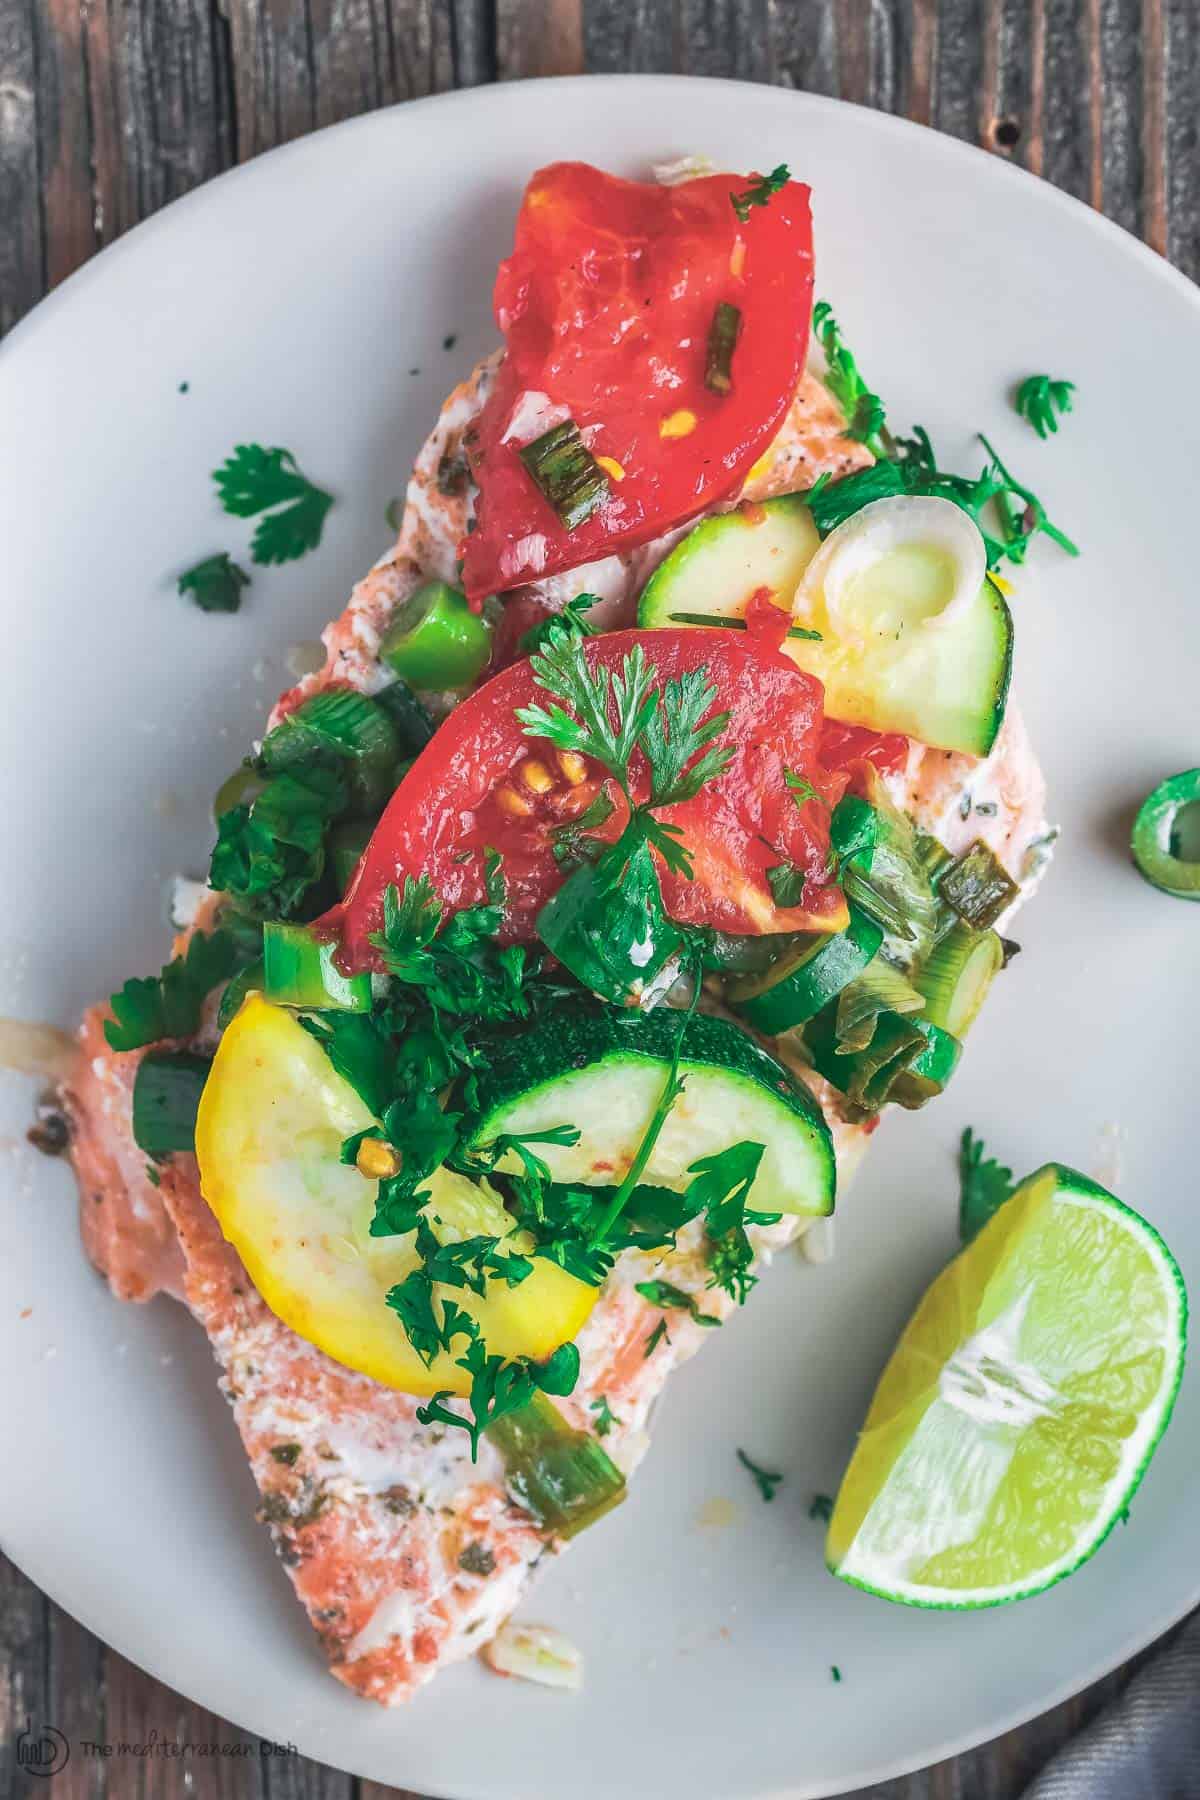 Oven baked salmon served on a plate with vegetables and parsley